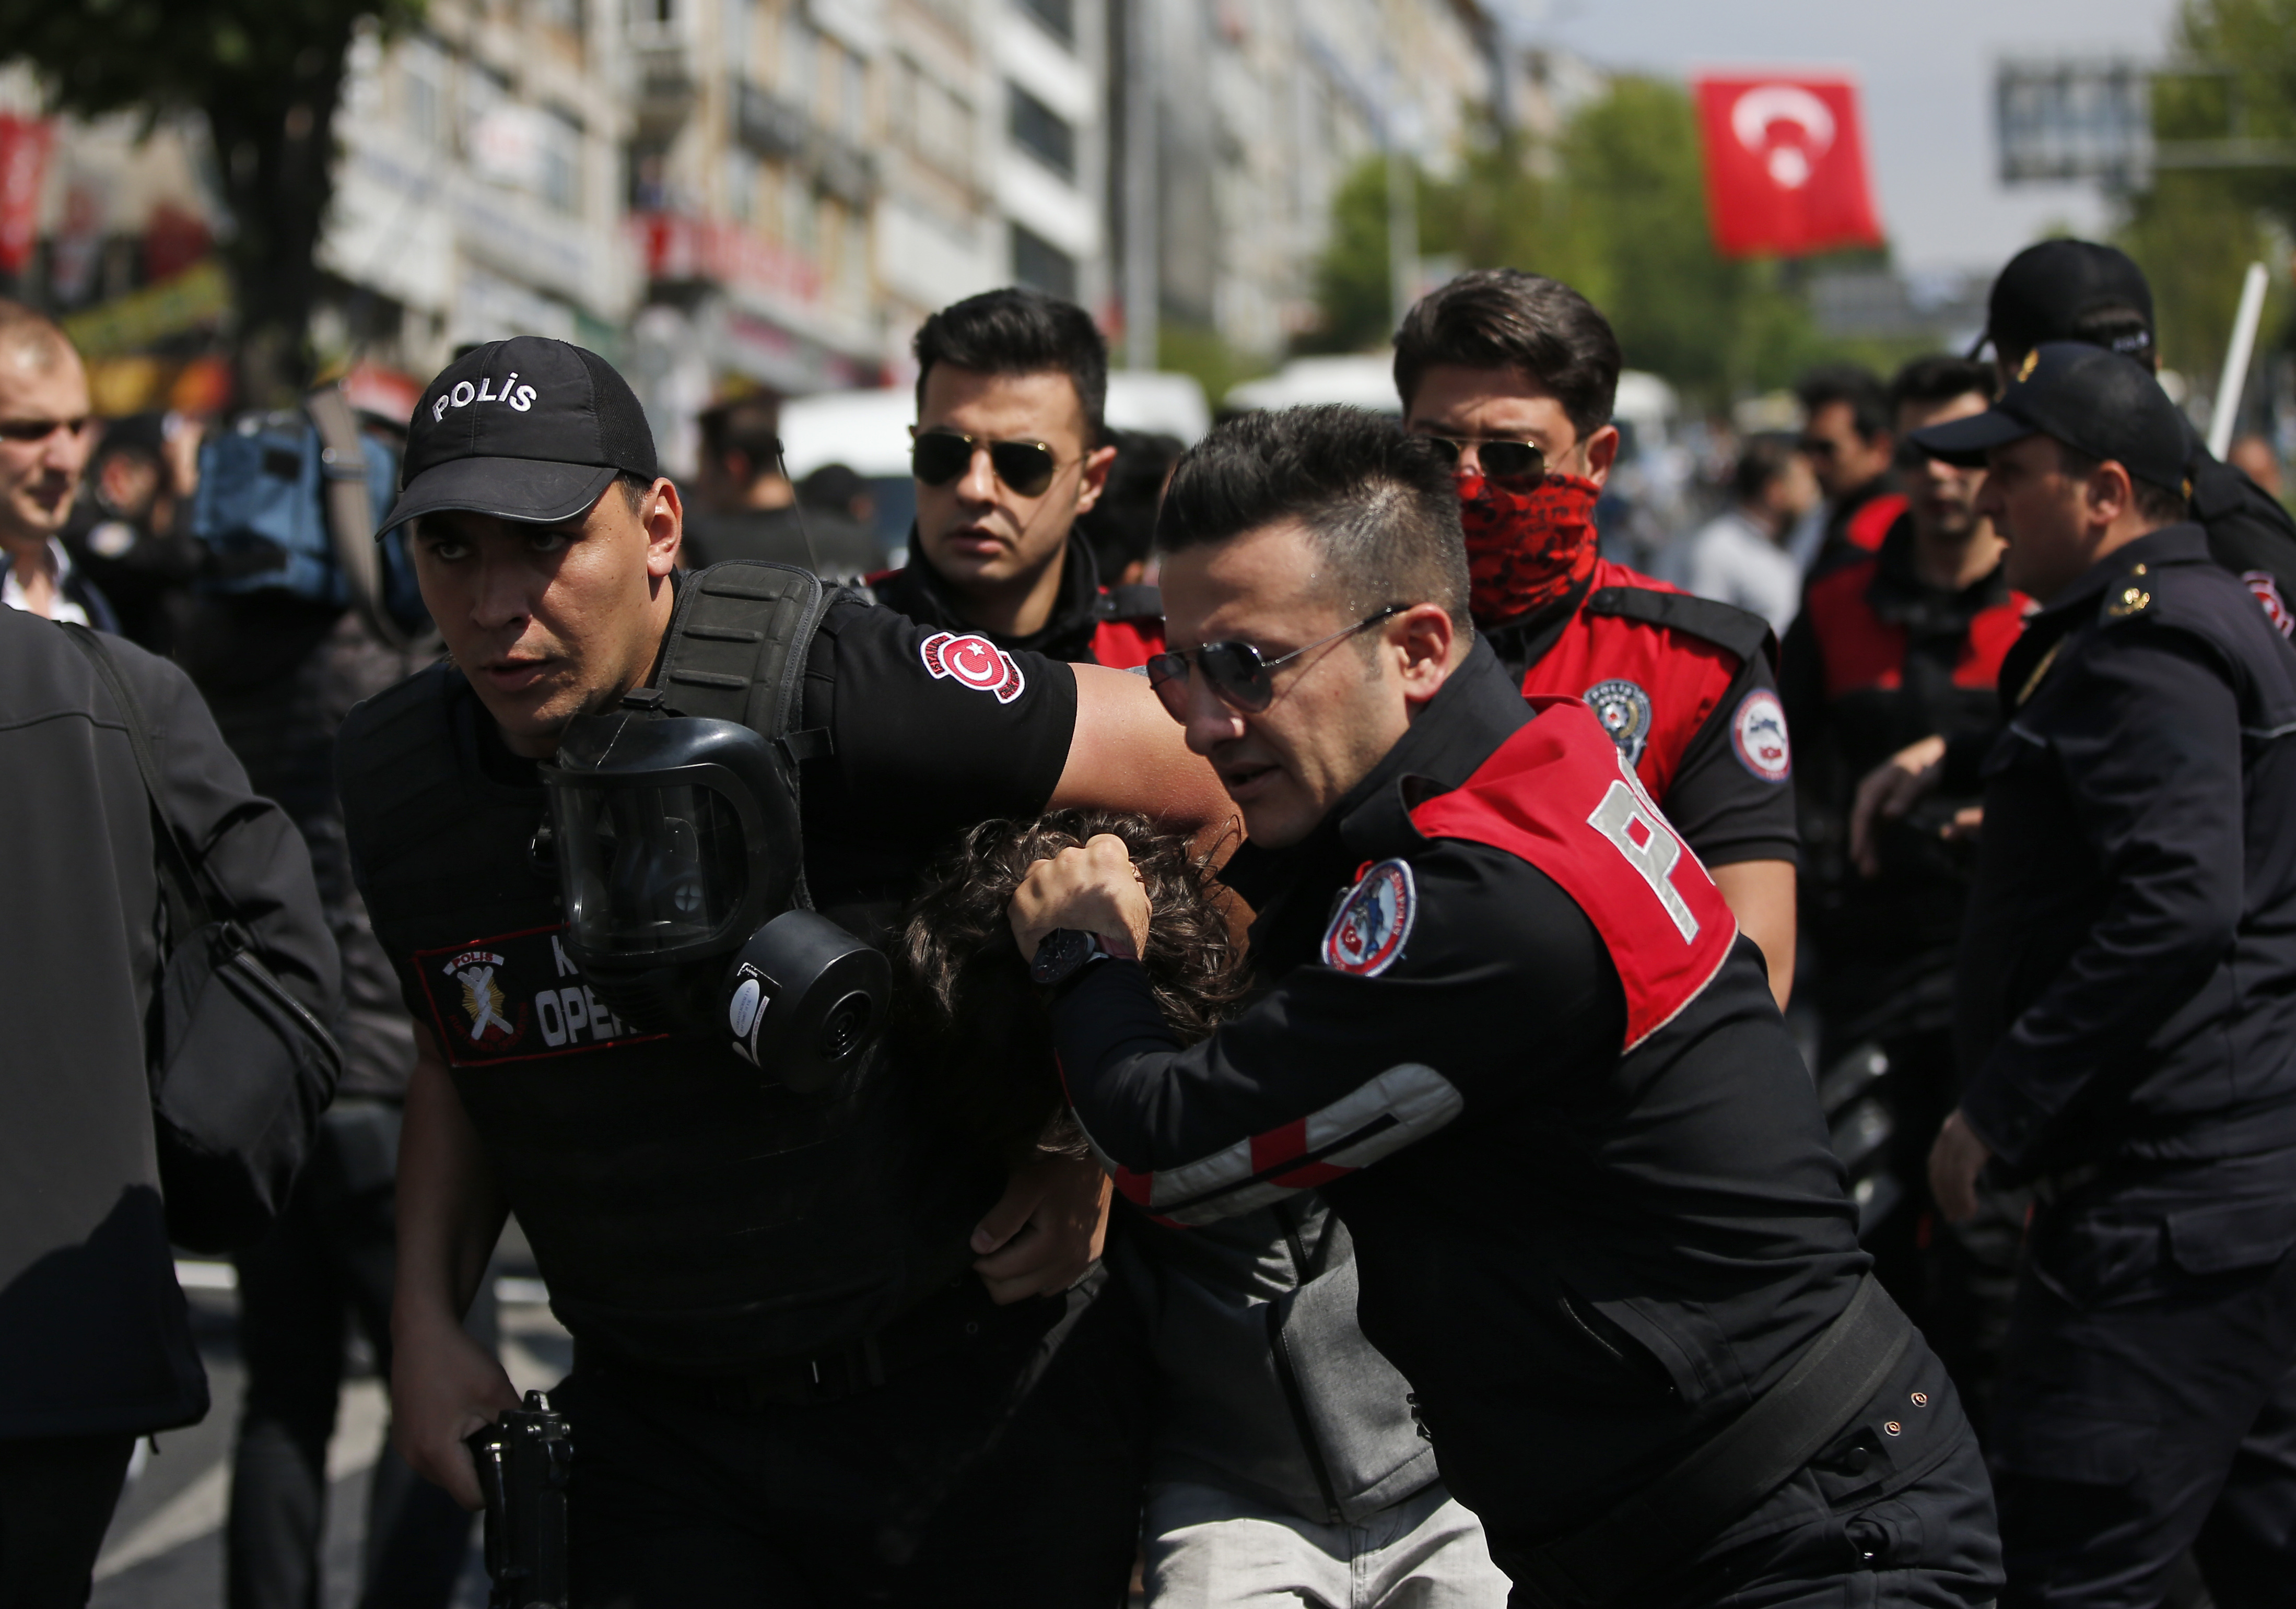 Turkish police officers arrest a demonstrator during May Day protests in Istanbul, Tuesday, May 1, 2018. Police in Istanbul detained dozens of demonstrators who tried to march toward Istanbul's symbolic Taksim Square in defiance of a ban by the government, citing security concerns. (AP Photo/Lefteris Pitarakis)